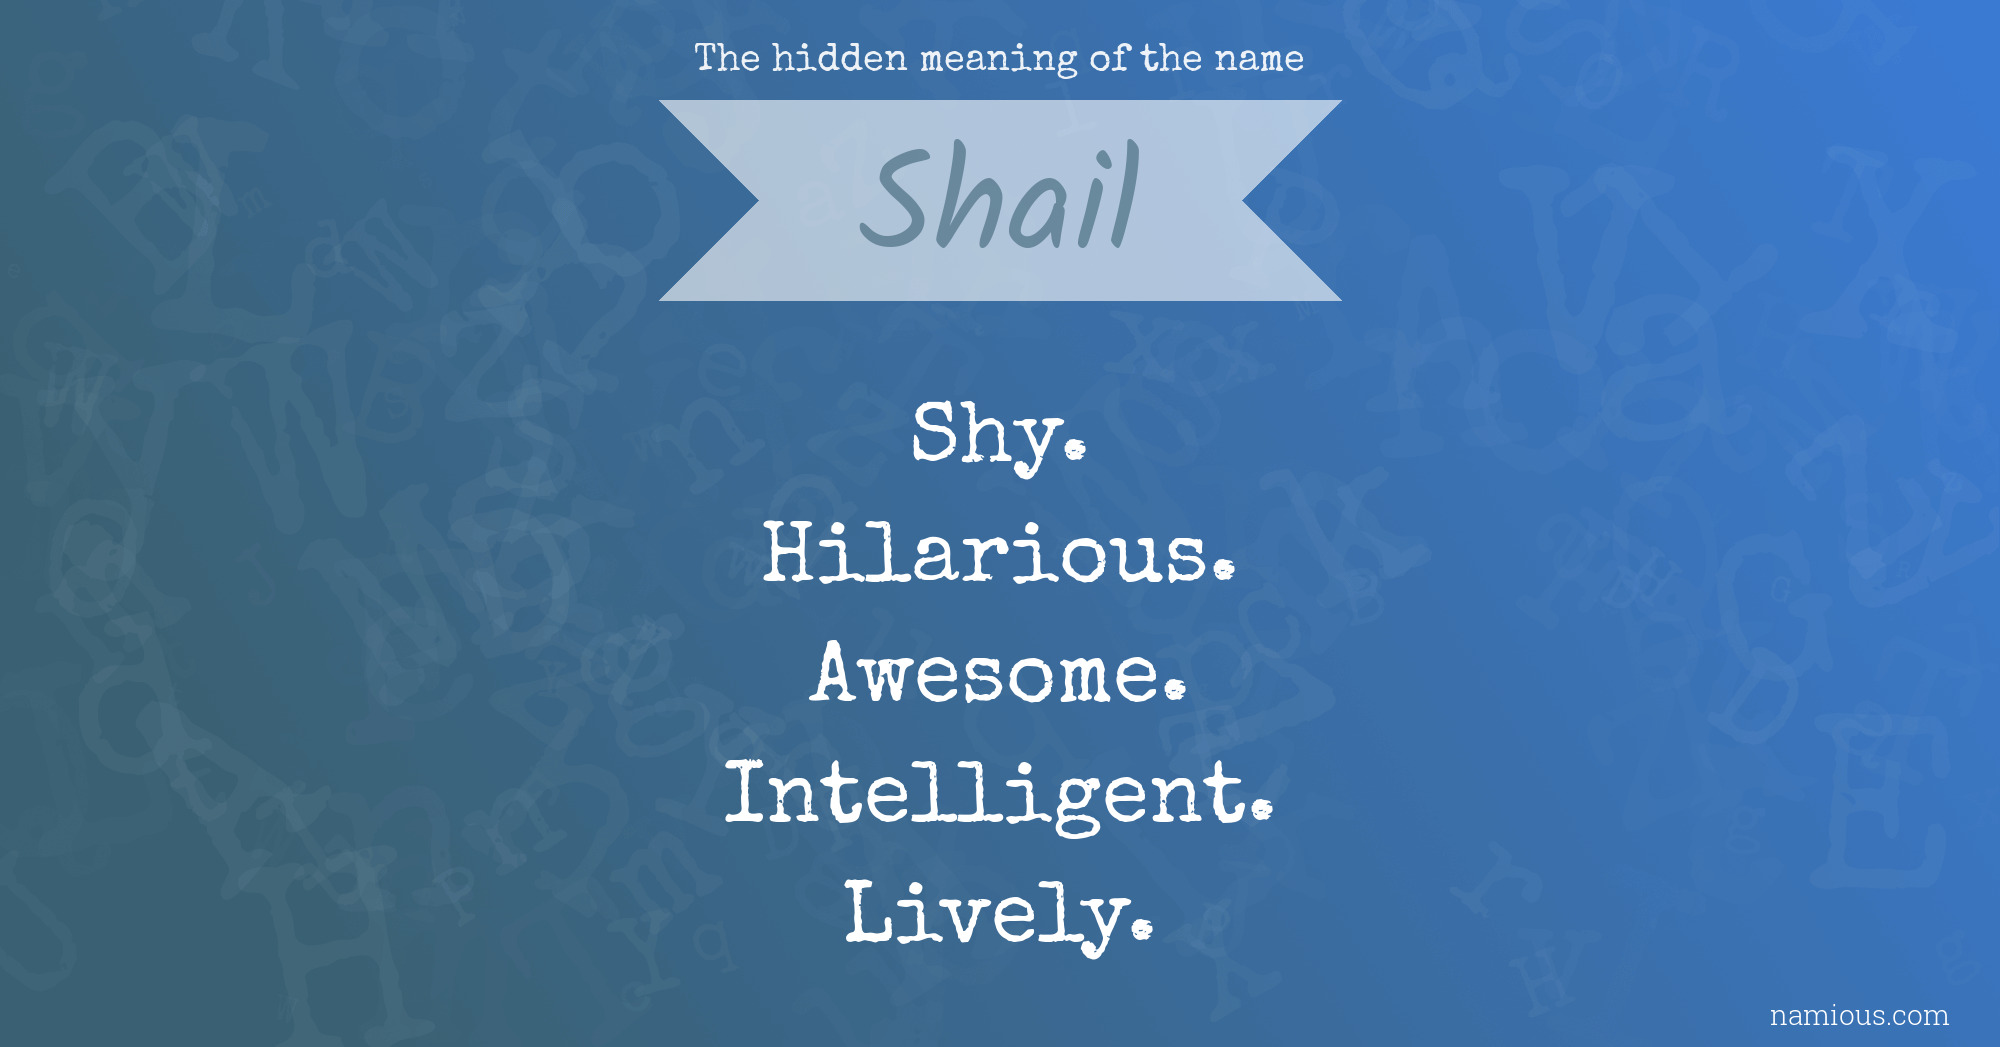 The hidden meaning of the name Shail Namious